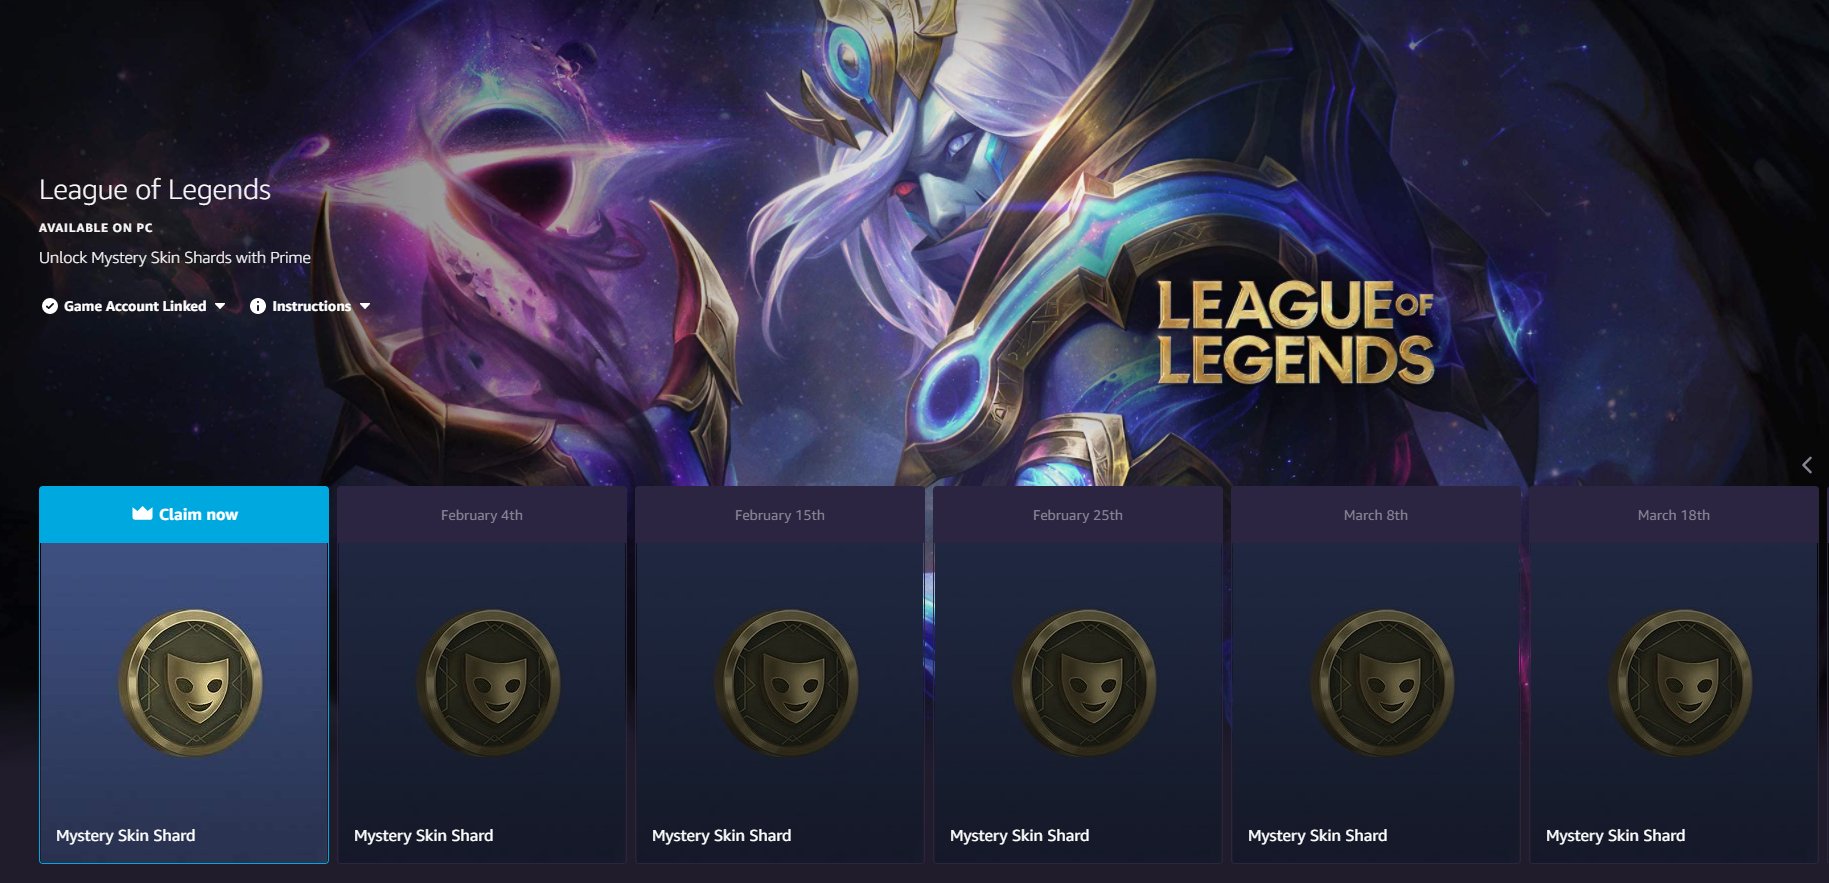 moobeat Twitter: "A new LoL Mystery shard is now available Prime Gaming! https://t.co/n511TzfuB1 https://t.co/0yXOeGHgHx" / Twitter